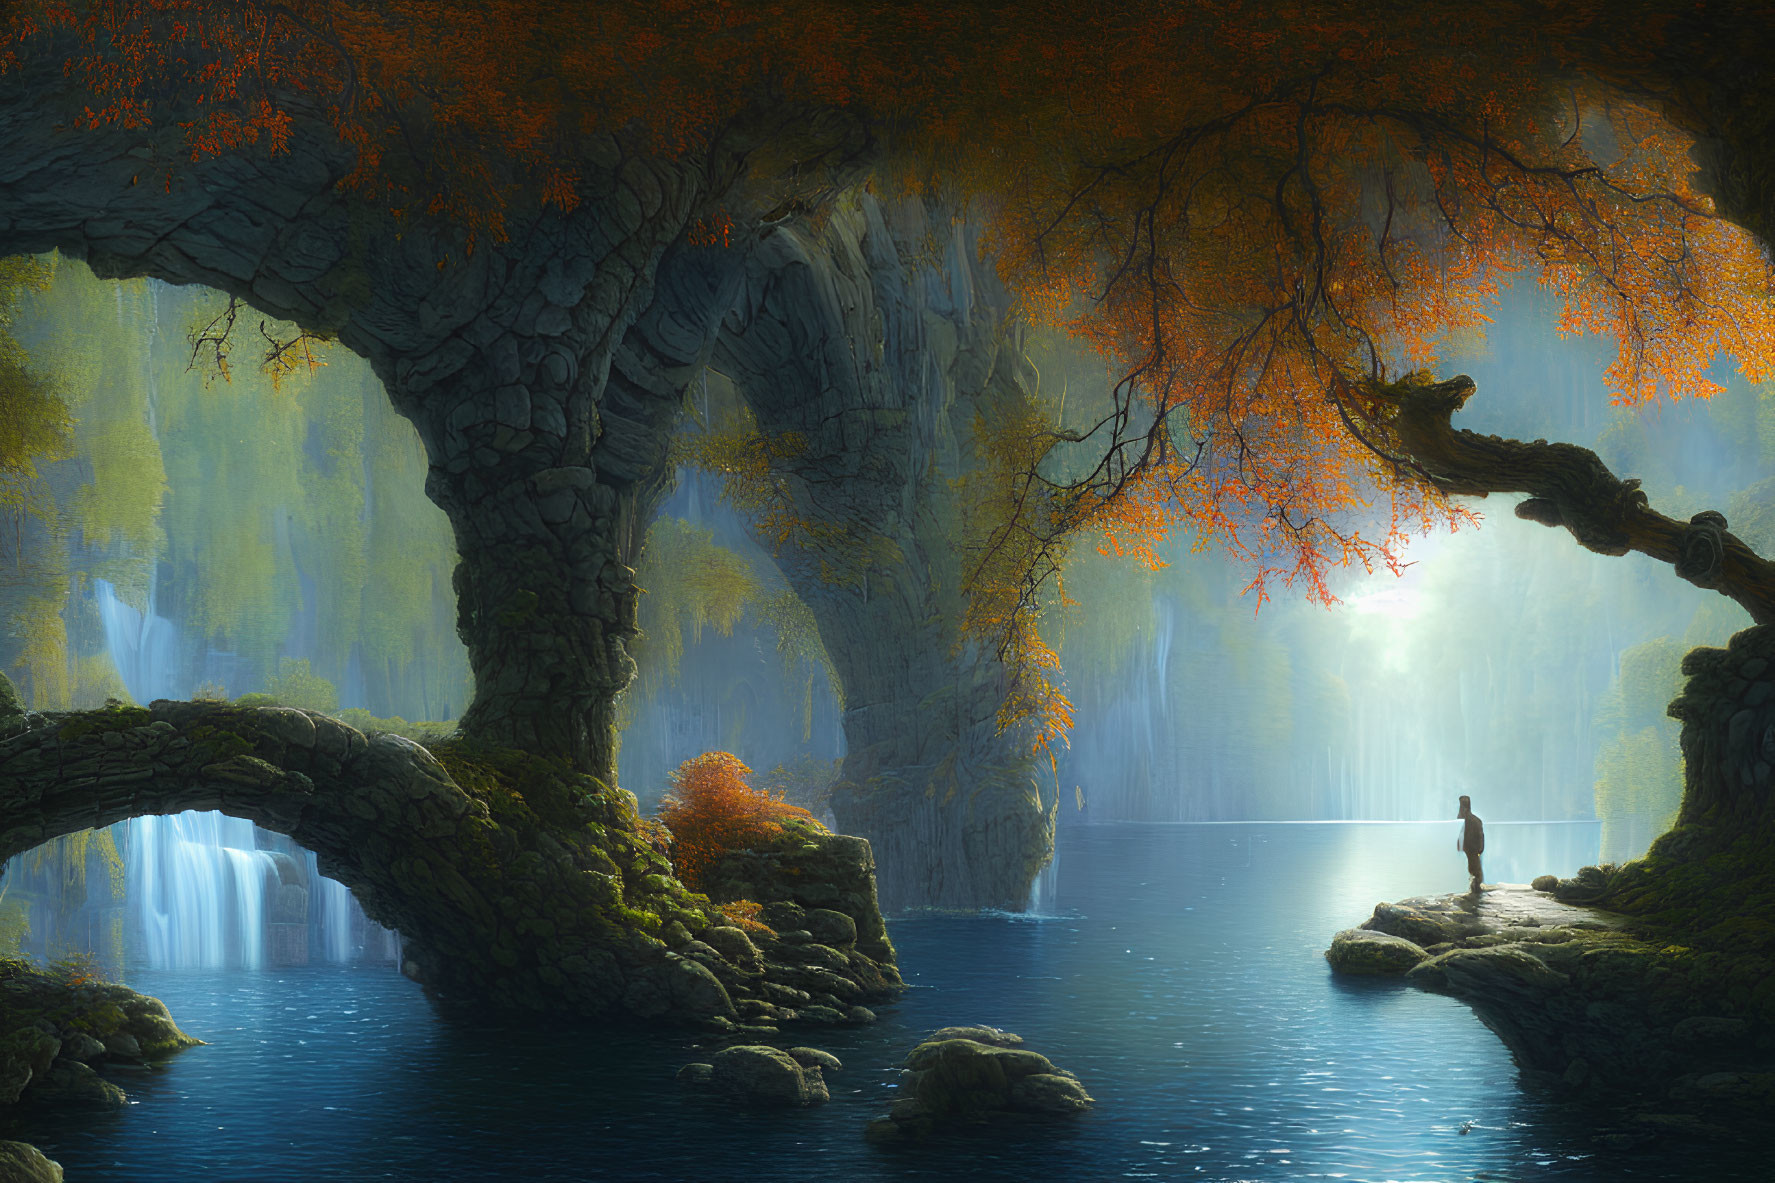 Tranquil lakeshore with stone arches, cascading waterfalls, and orange-leaved